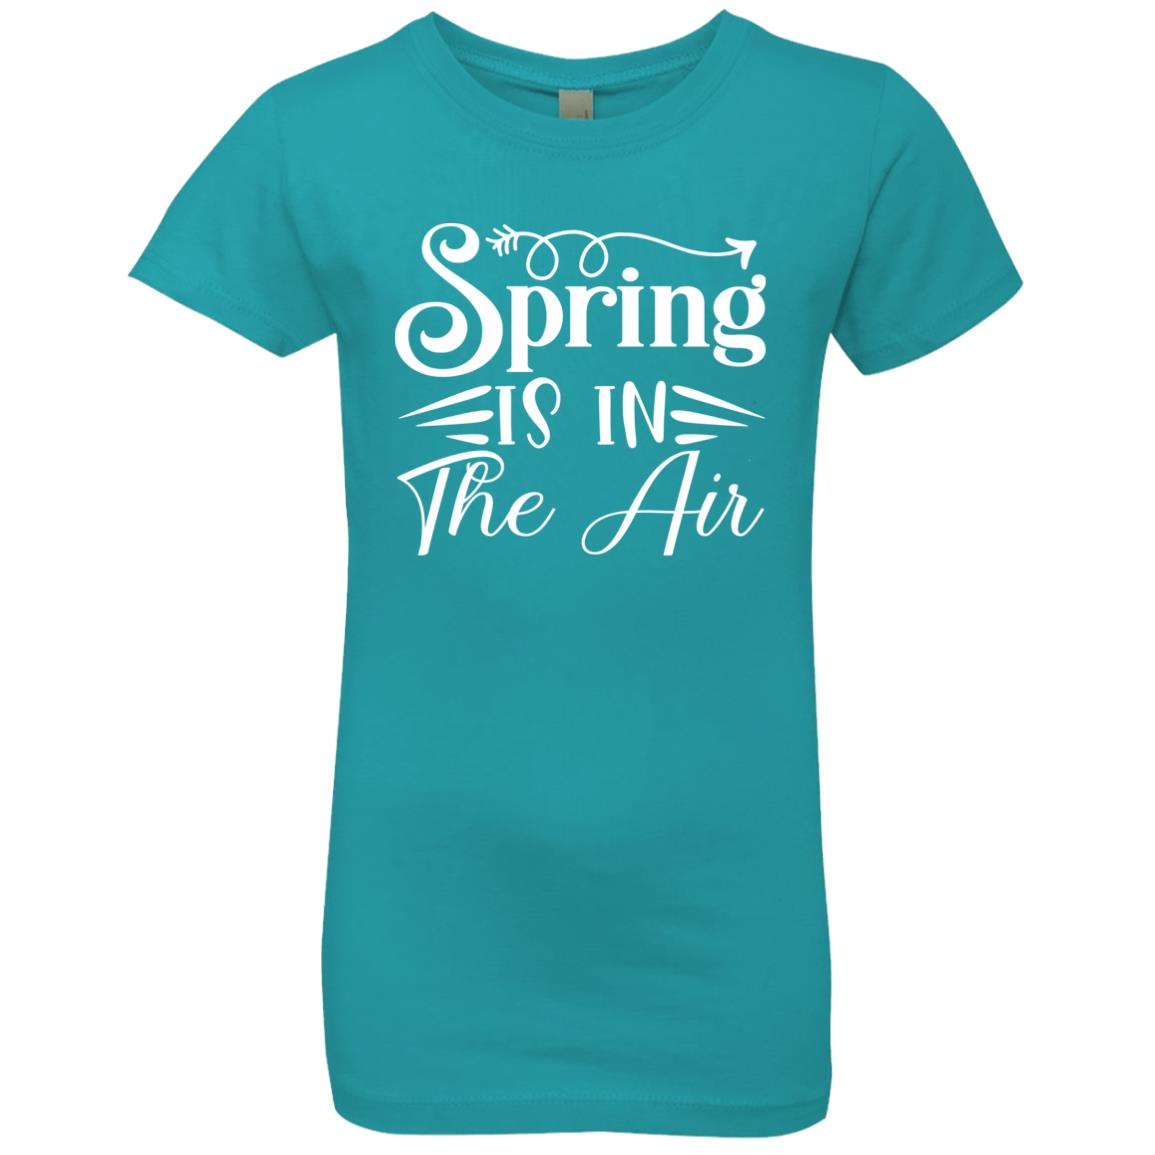 Spring Is in the Air | Short Sleeve Kids T-shrit | 100% Cotton